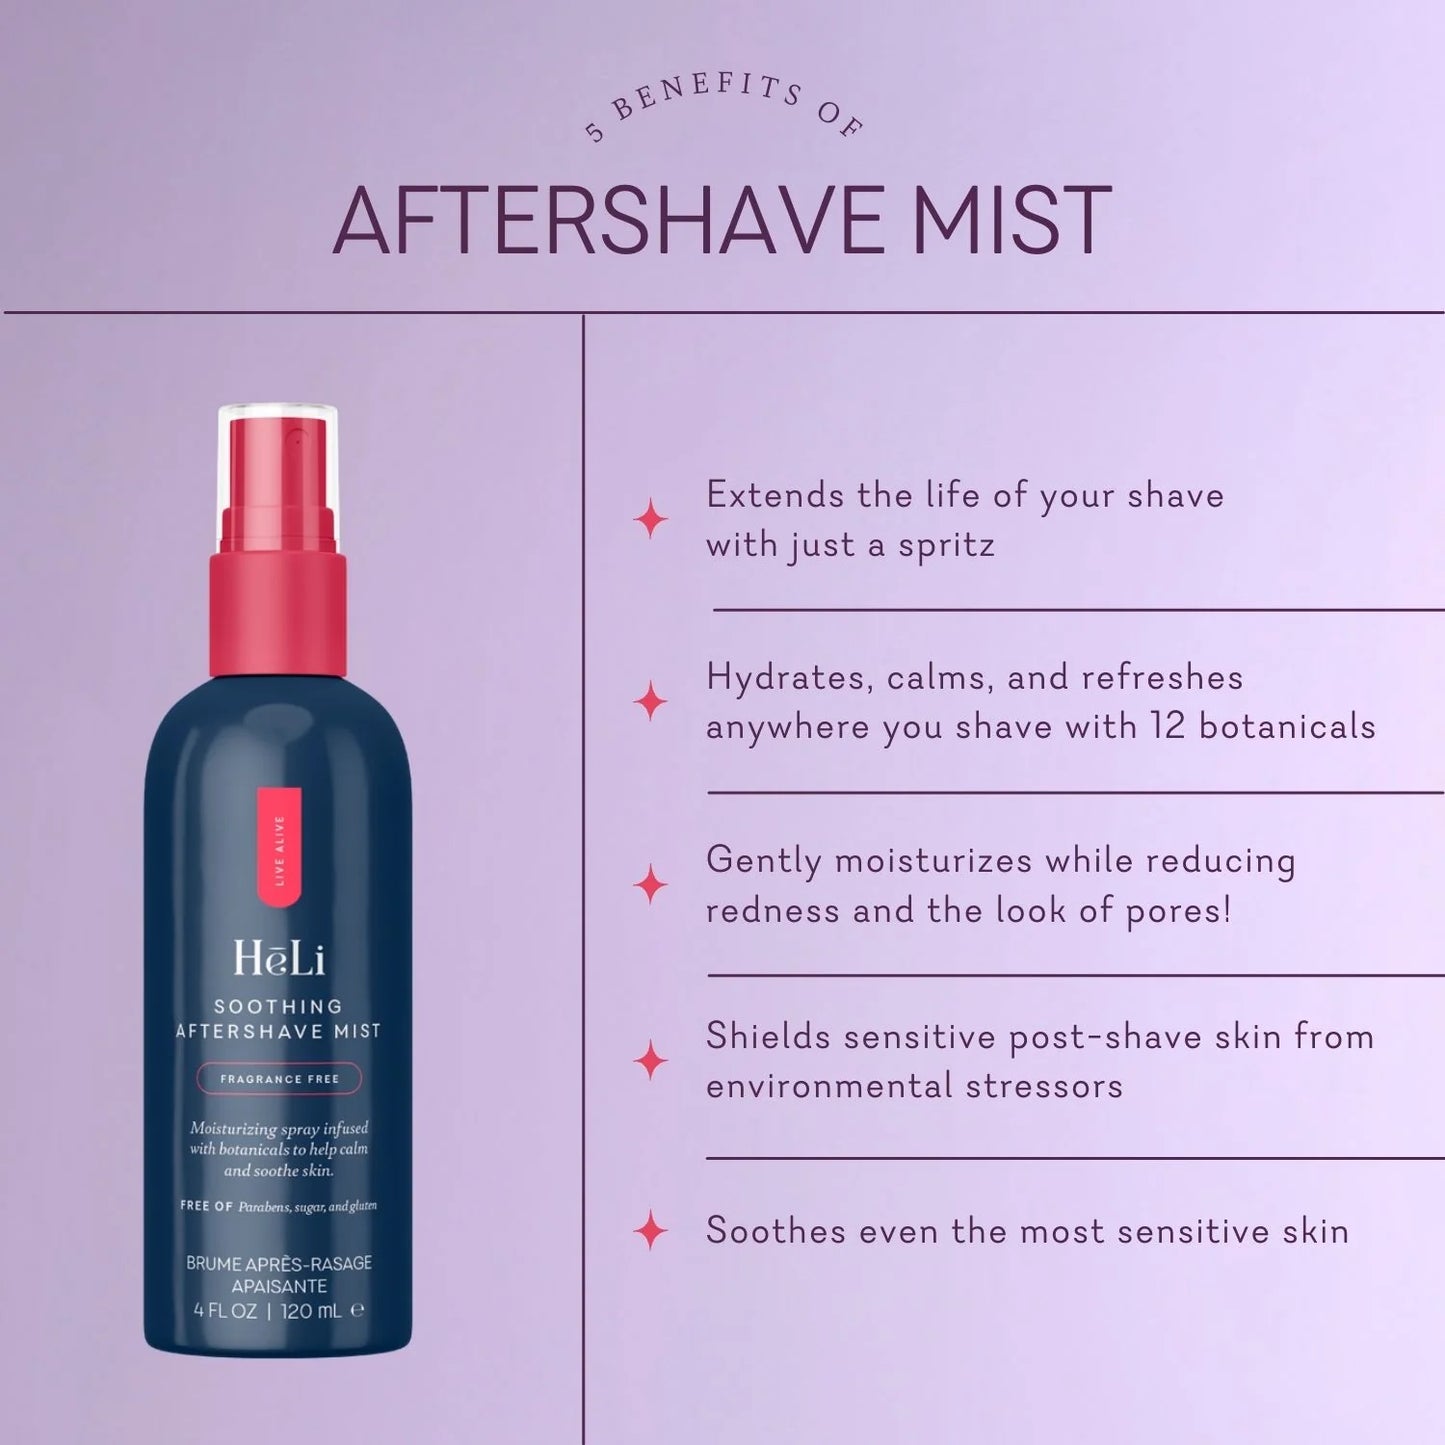 Soothing Aftershave Mist